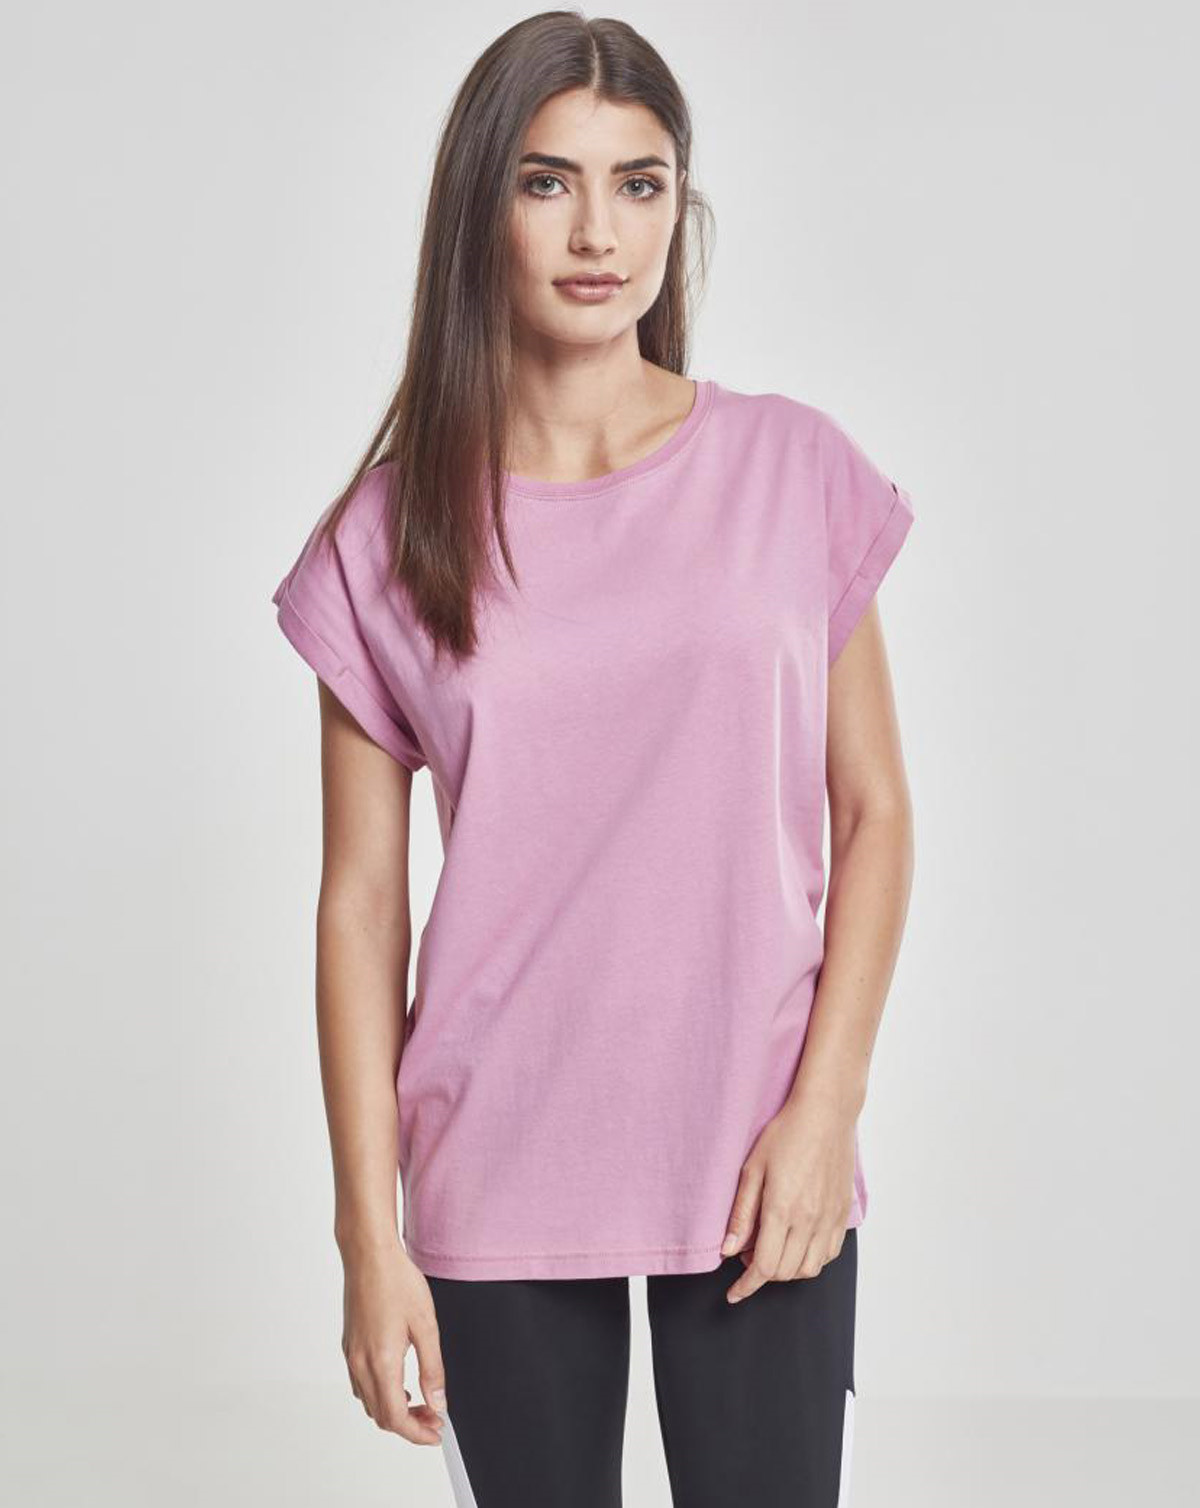 Urban Classics Ladies Extended Shoulder Tee (Cool Pink, XL)